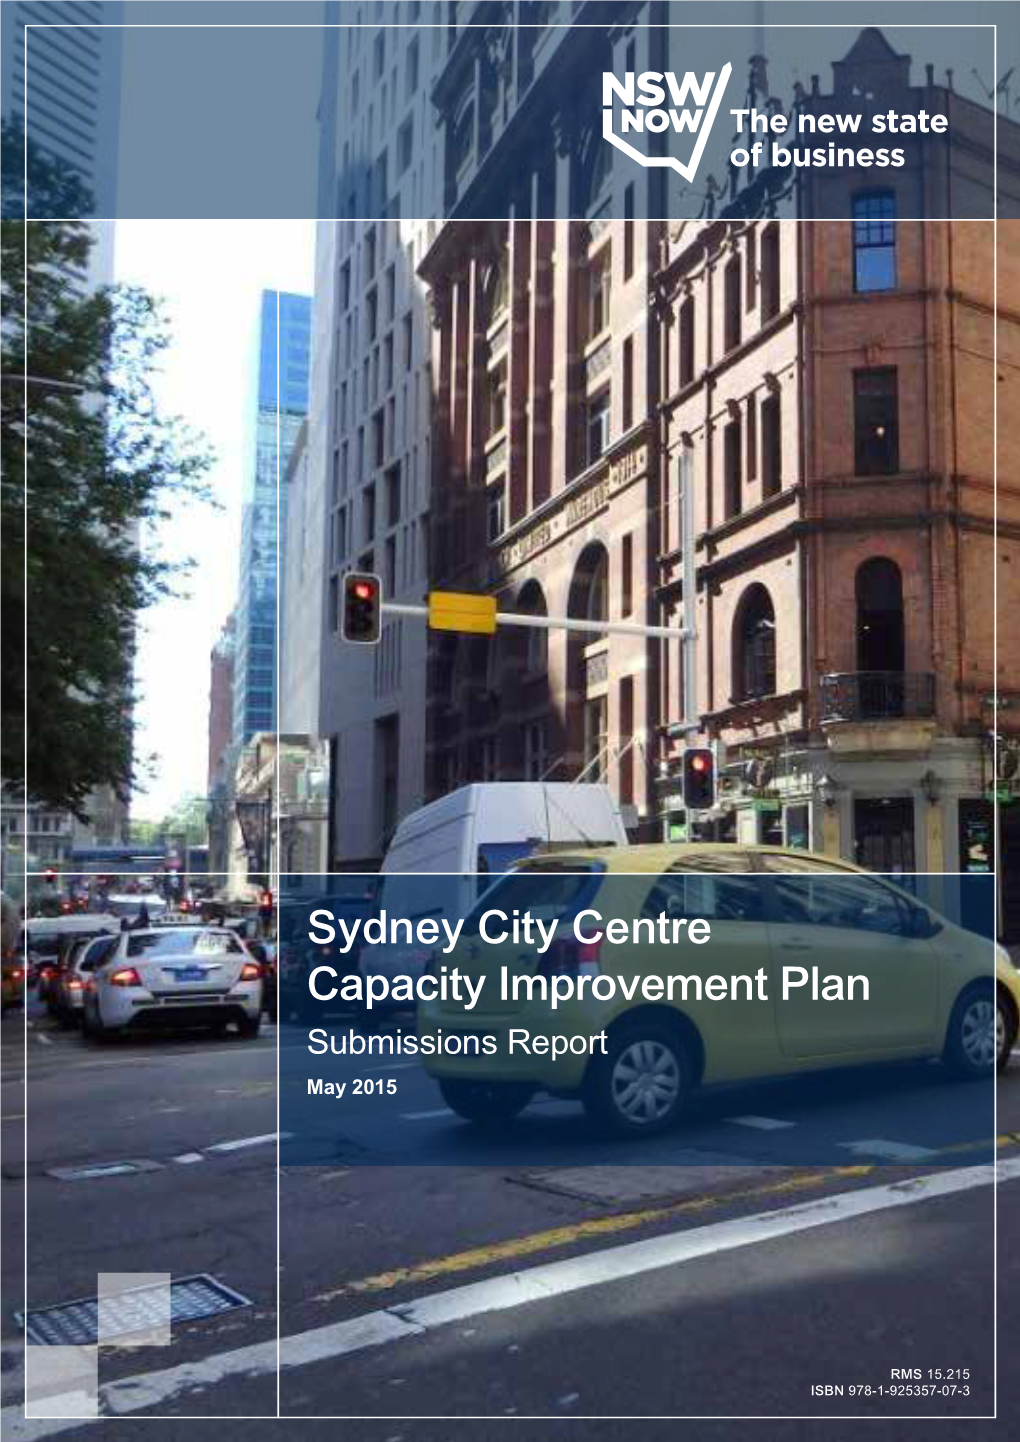 Sydney City Centre Traffic Capacity Improvement Plan Submissions Report